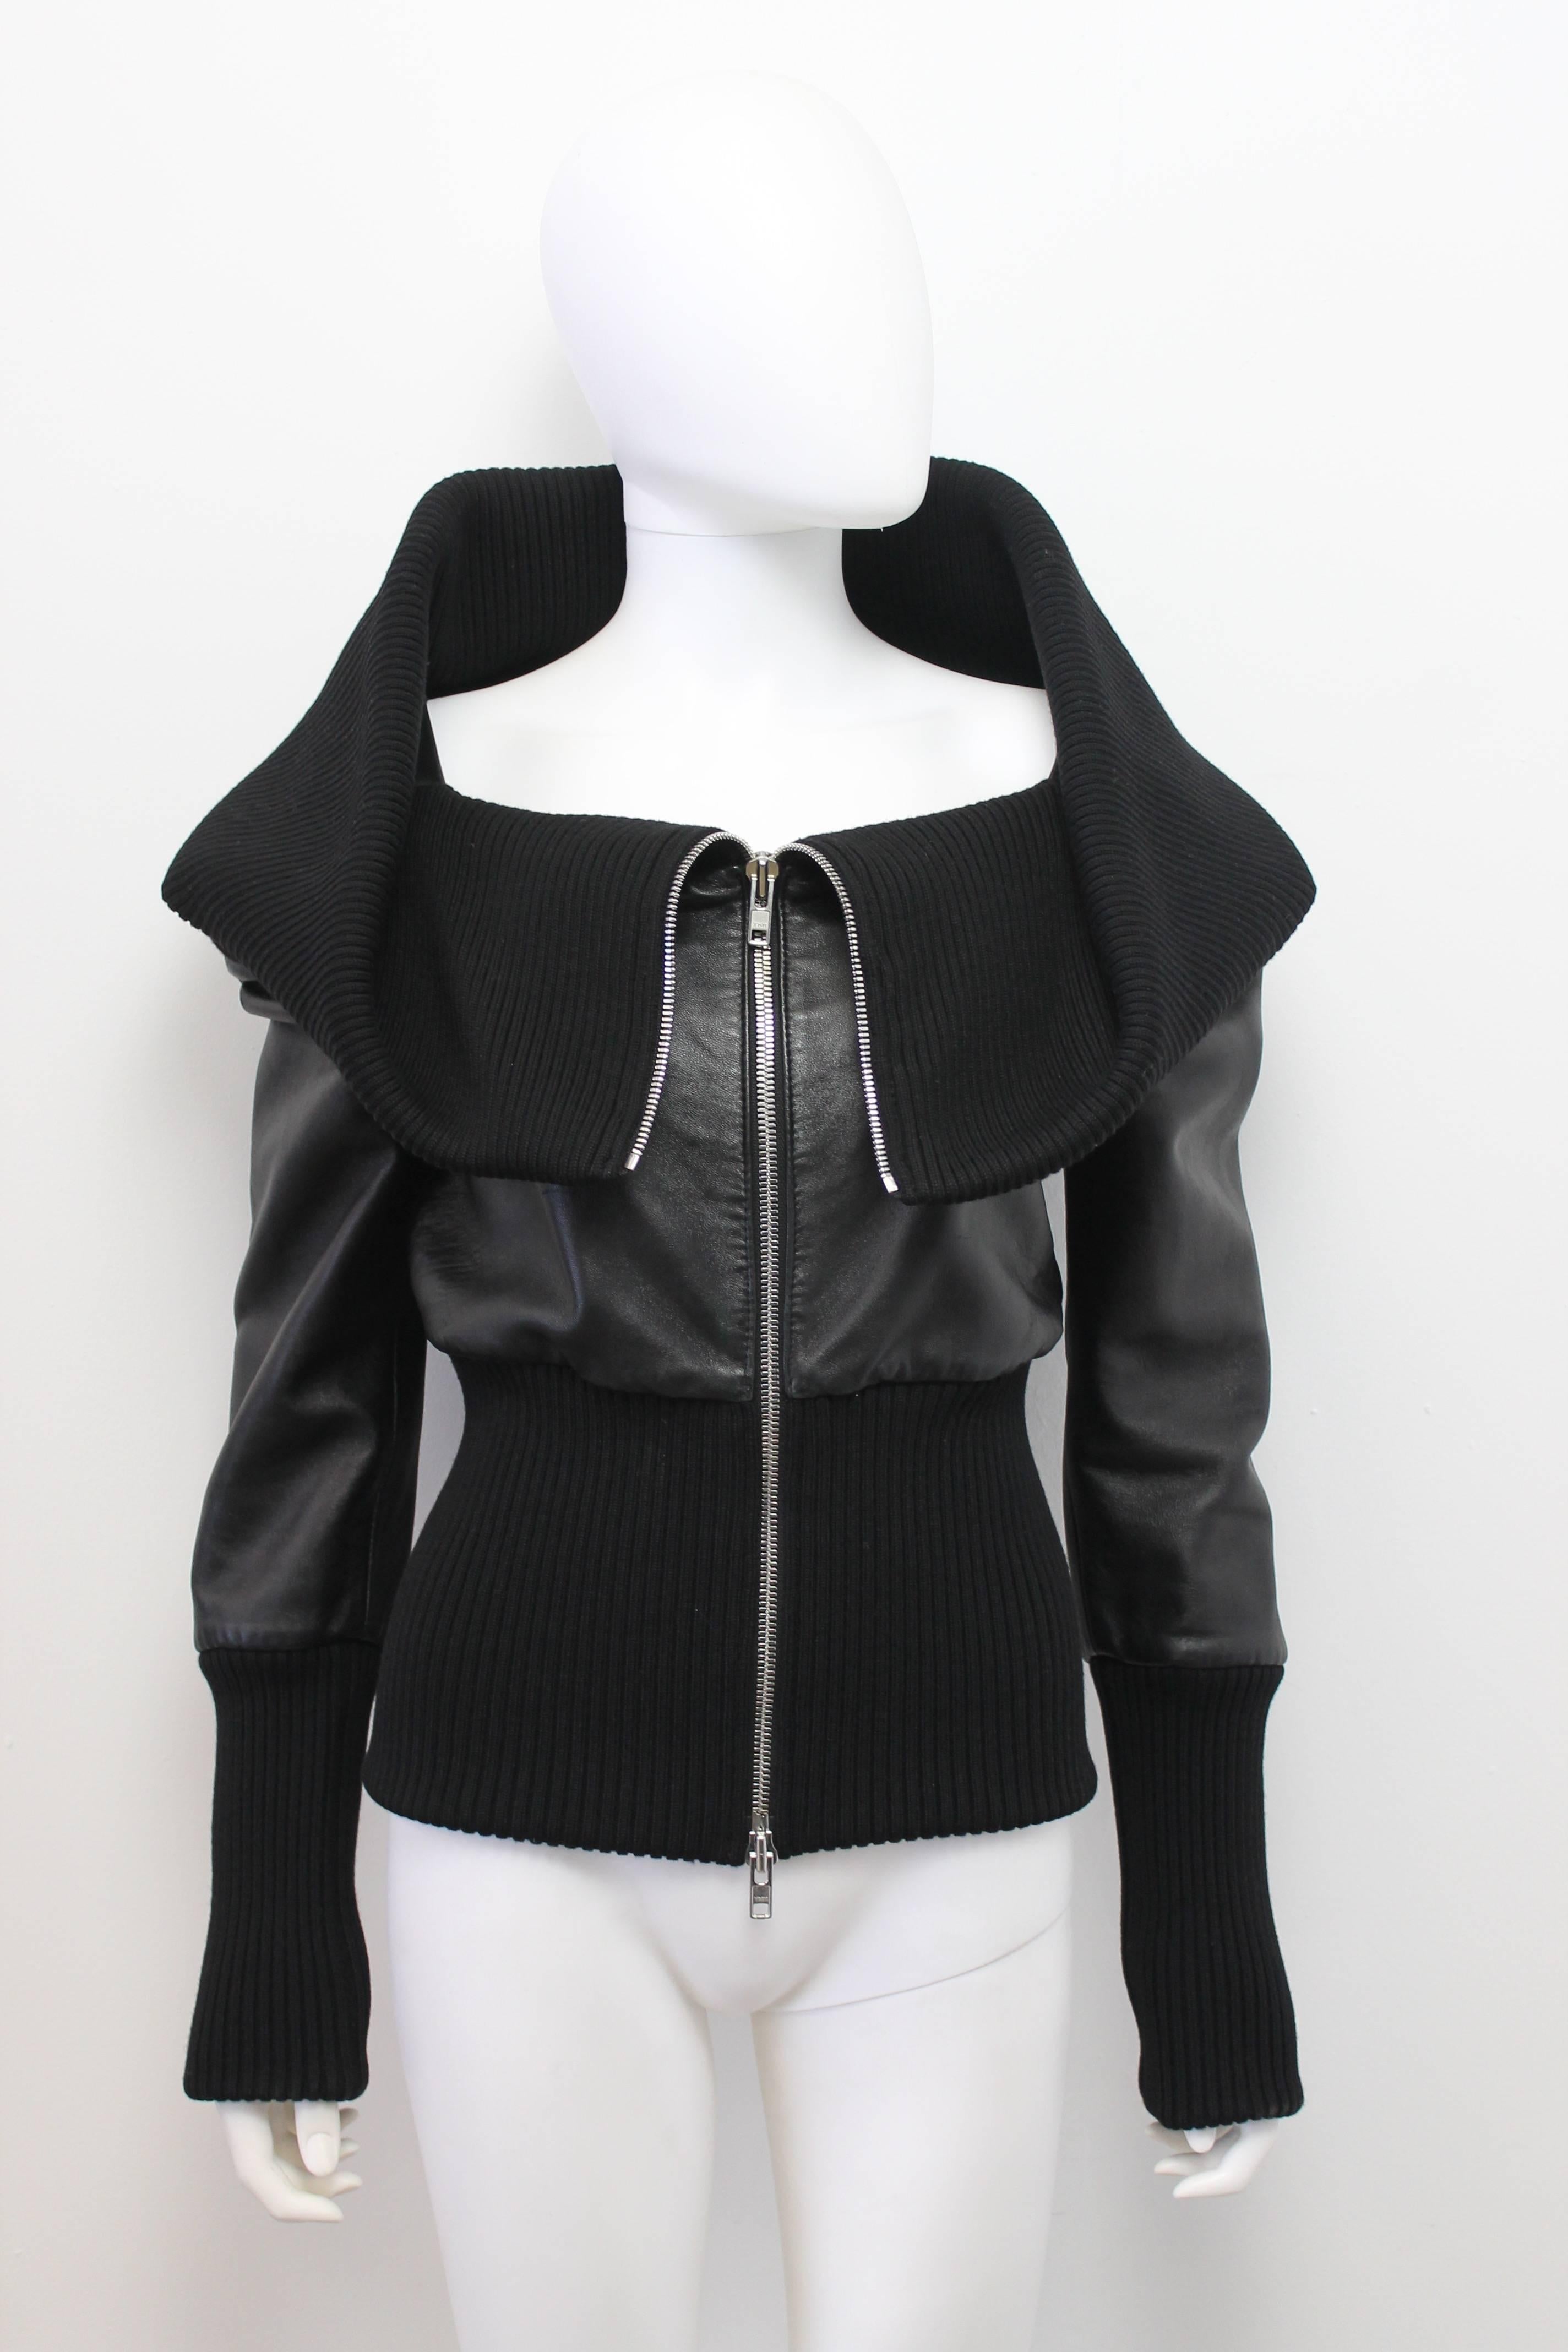 Maison Martin Margiela AW 2008 Black Leather Jacket In Excellent Condition In London, GB